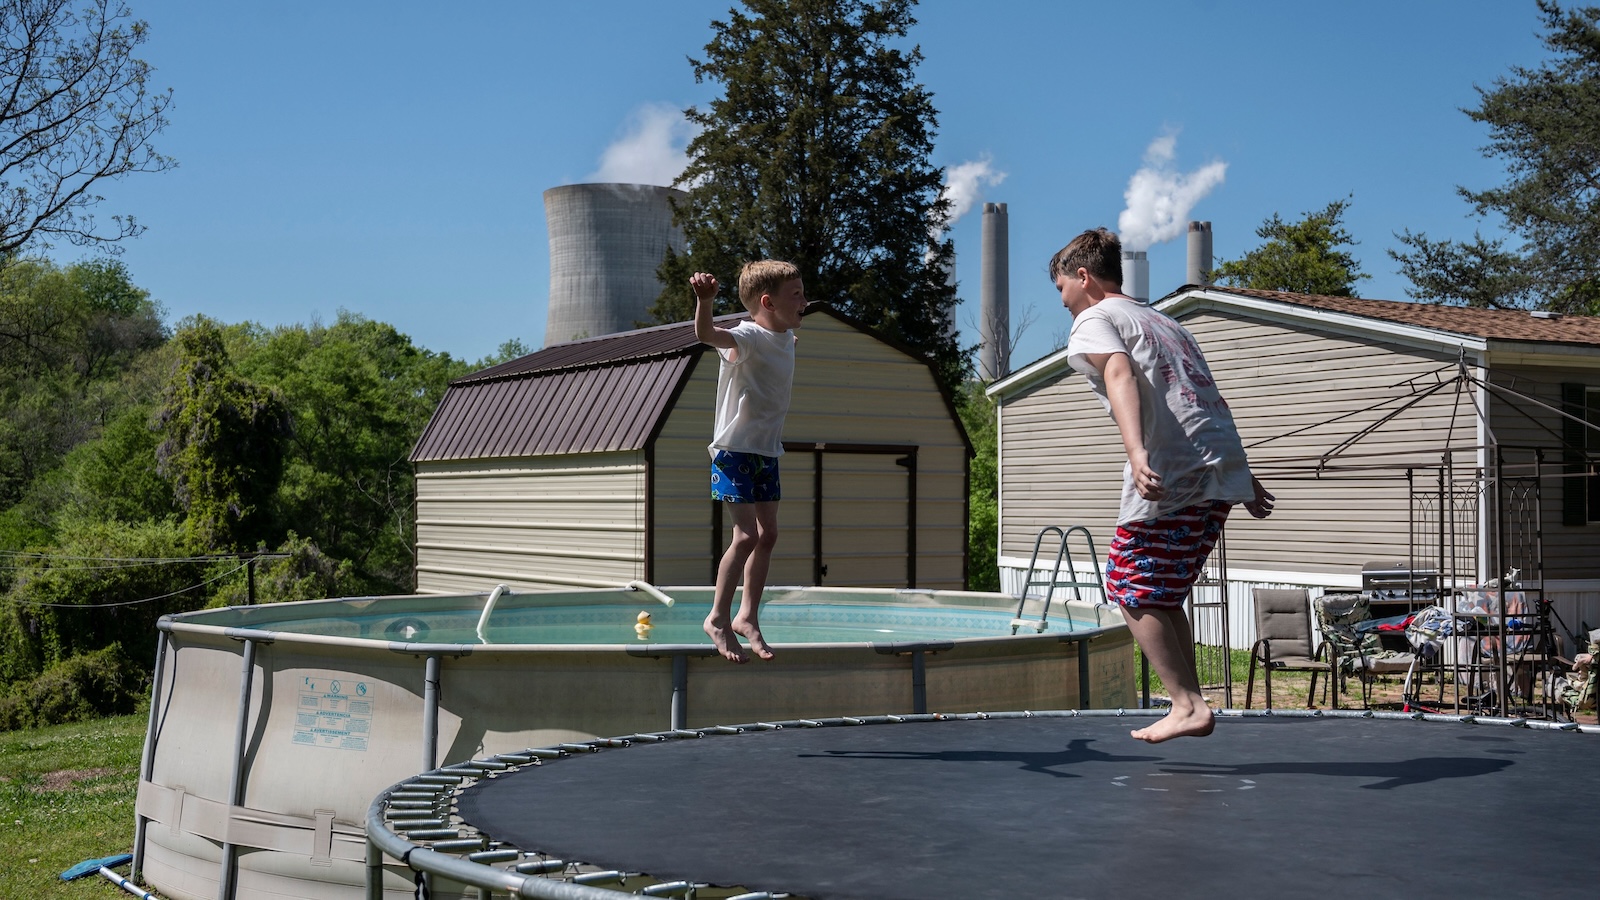 Children play on a trampoline outside their grandparents' home as steam rises from the James H. Miller Jr. coal-fired power plant in Adamsville, Alabama.